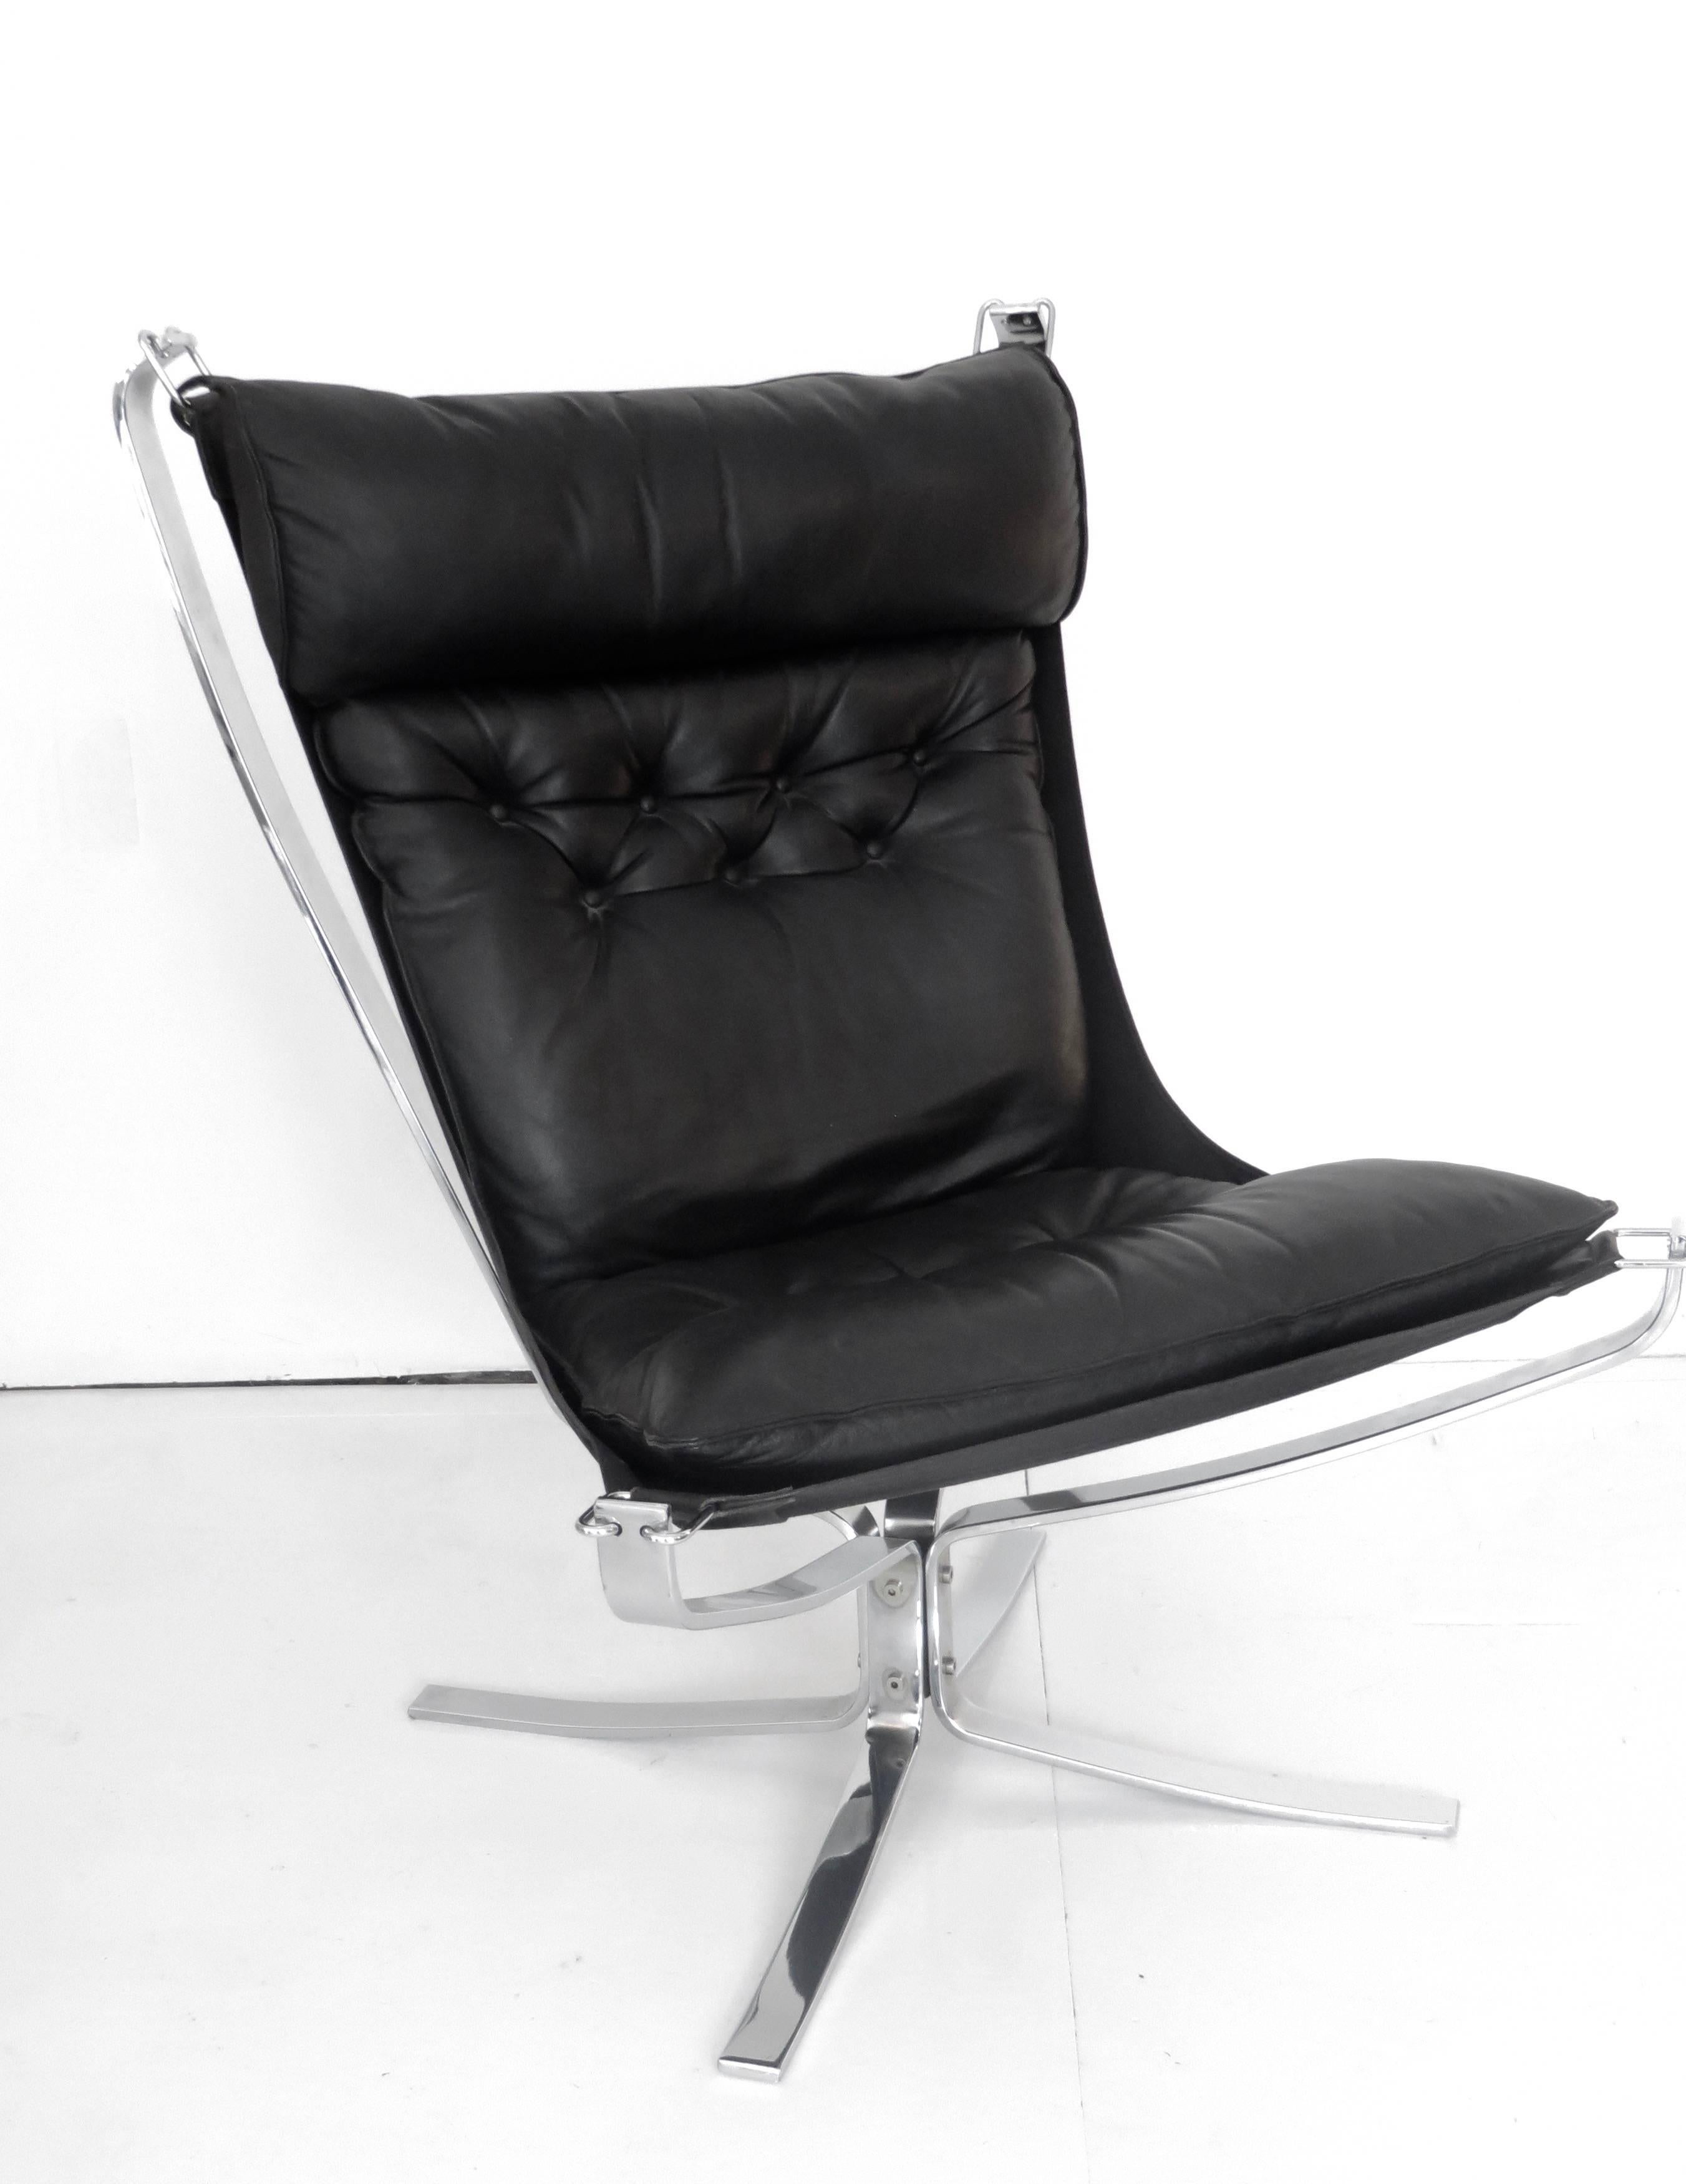 A pair of Sigurd Ressell Falcon lounge chairs in black leather and chrome-plated steel, Norway, 1971, manufactured by Vatne Lenestolfabrikk.
High back black leather in excellent! Condition with chrome-plated steel with no pitting or rusting. The